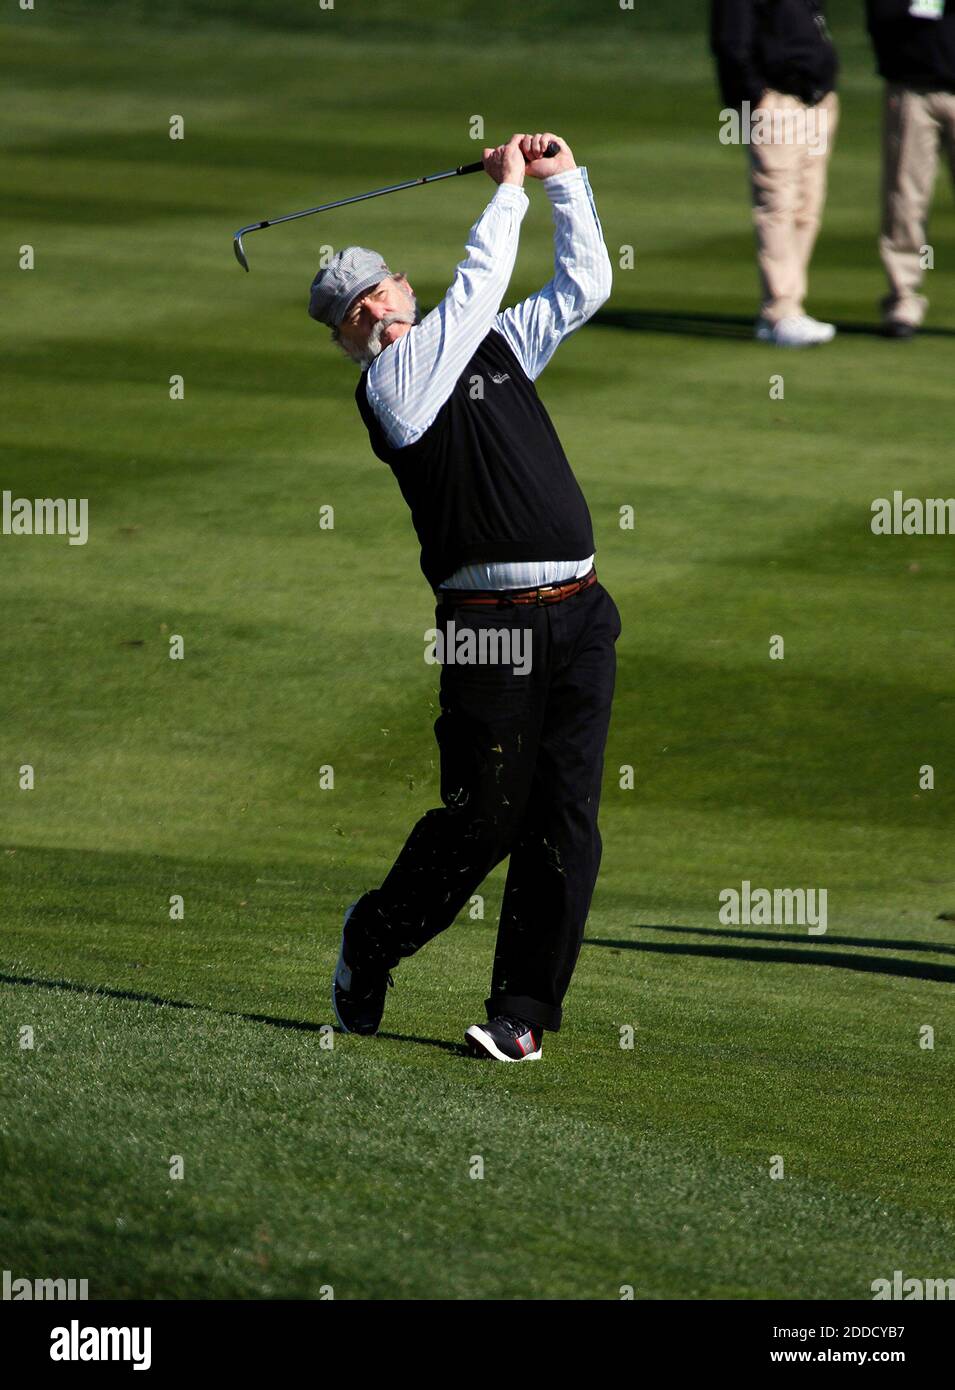 NO FILM, NO VIDEO, NO TV, NO DOCUMENTARY - Actor Bill Murray hits from the fairway at the third hole during the $100,000 celebrity charity shoot-out golf match at the AT&T Pebble Beach National Pro-Am in Pebble Beach, CA, USA on February 6, 2013. Photo by LiPo Ching/San Jose Mercury News/MCT/ABACAPRESS.COM Stock Photo